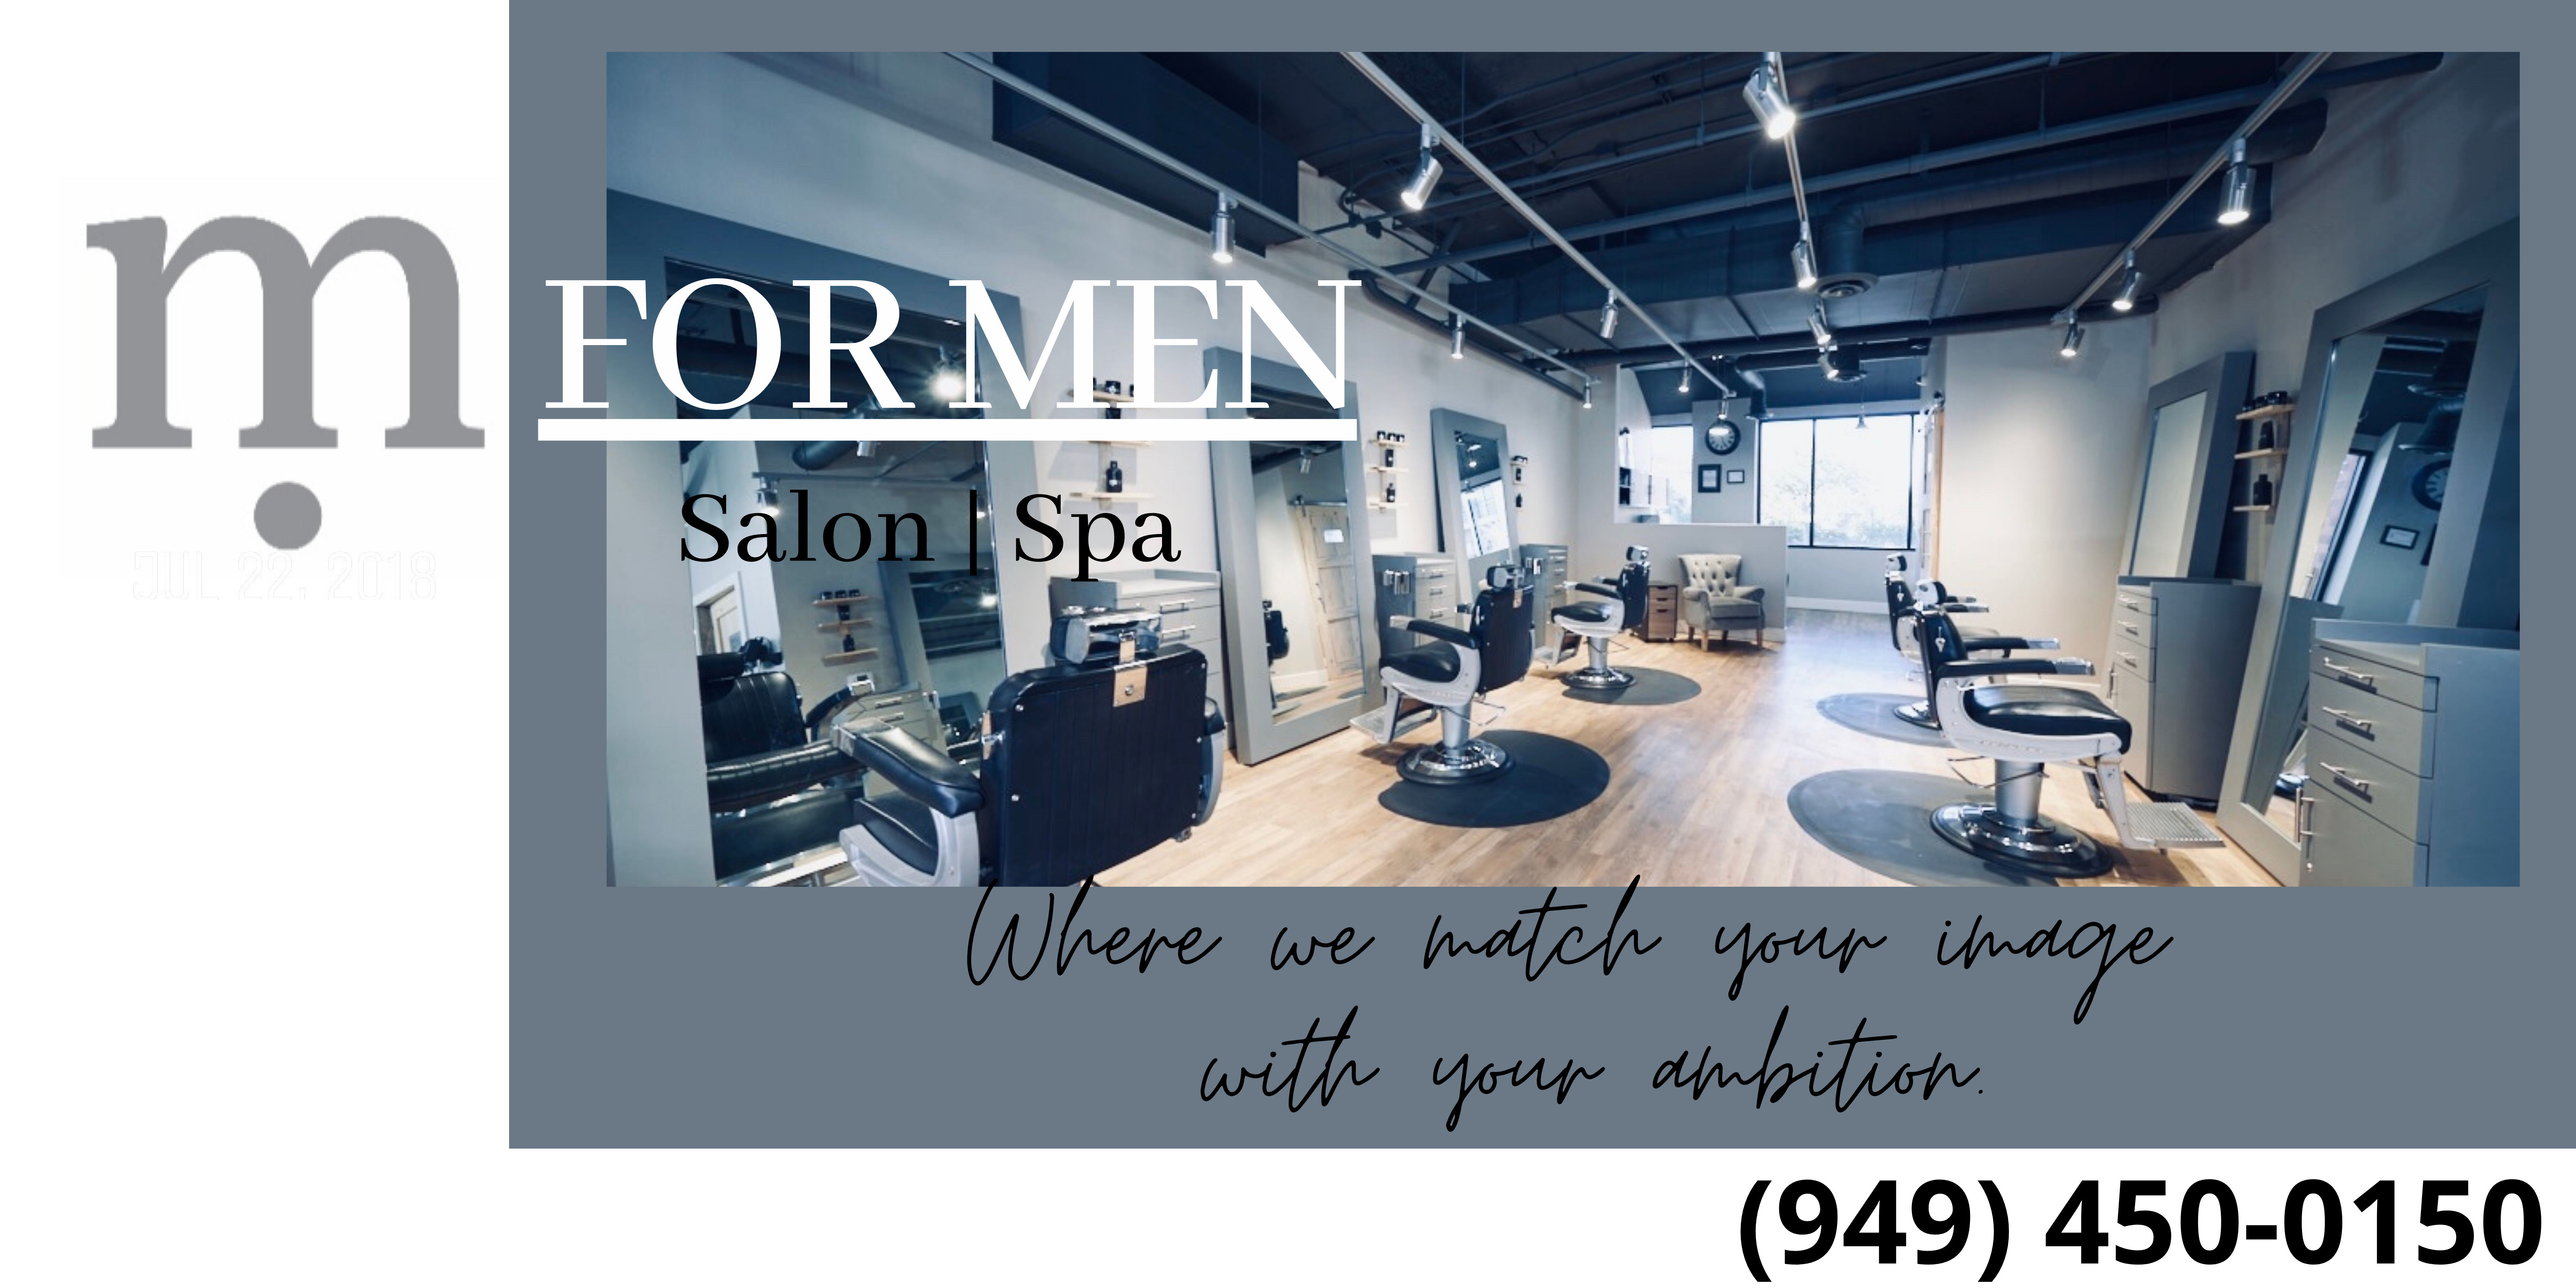 FOR MEN Salon and Spa